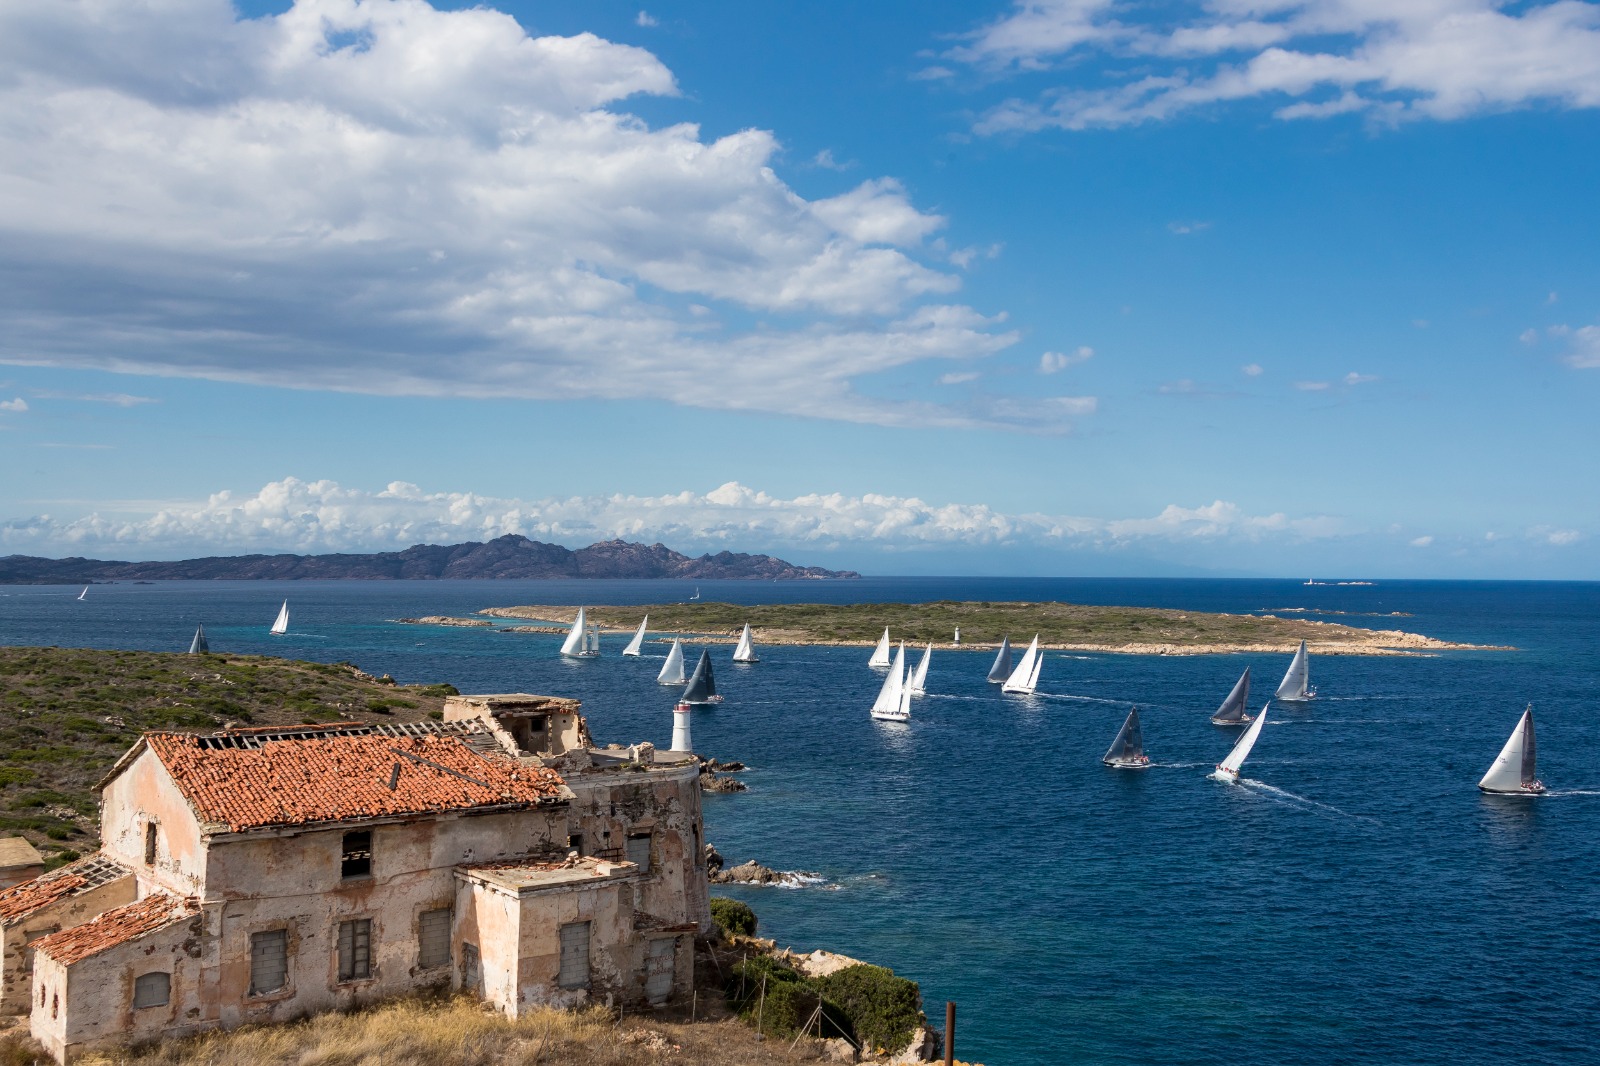 Entries open for ORC World Championship 2022 - NEWS - Yacht Club Costa Smeralda